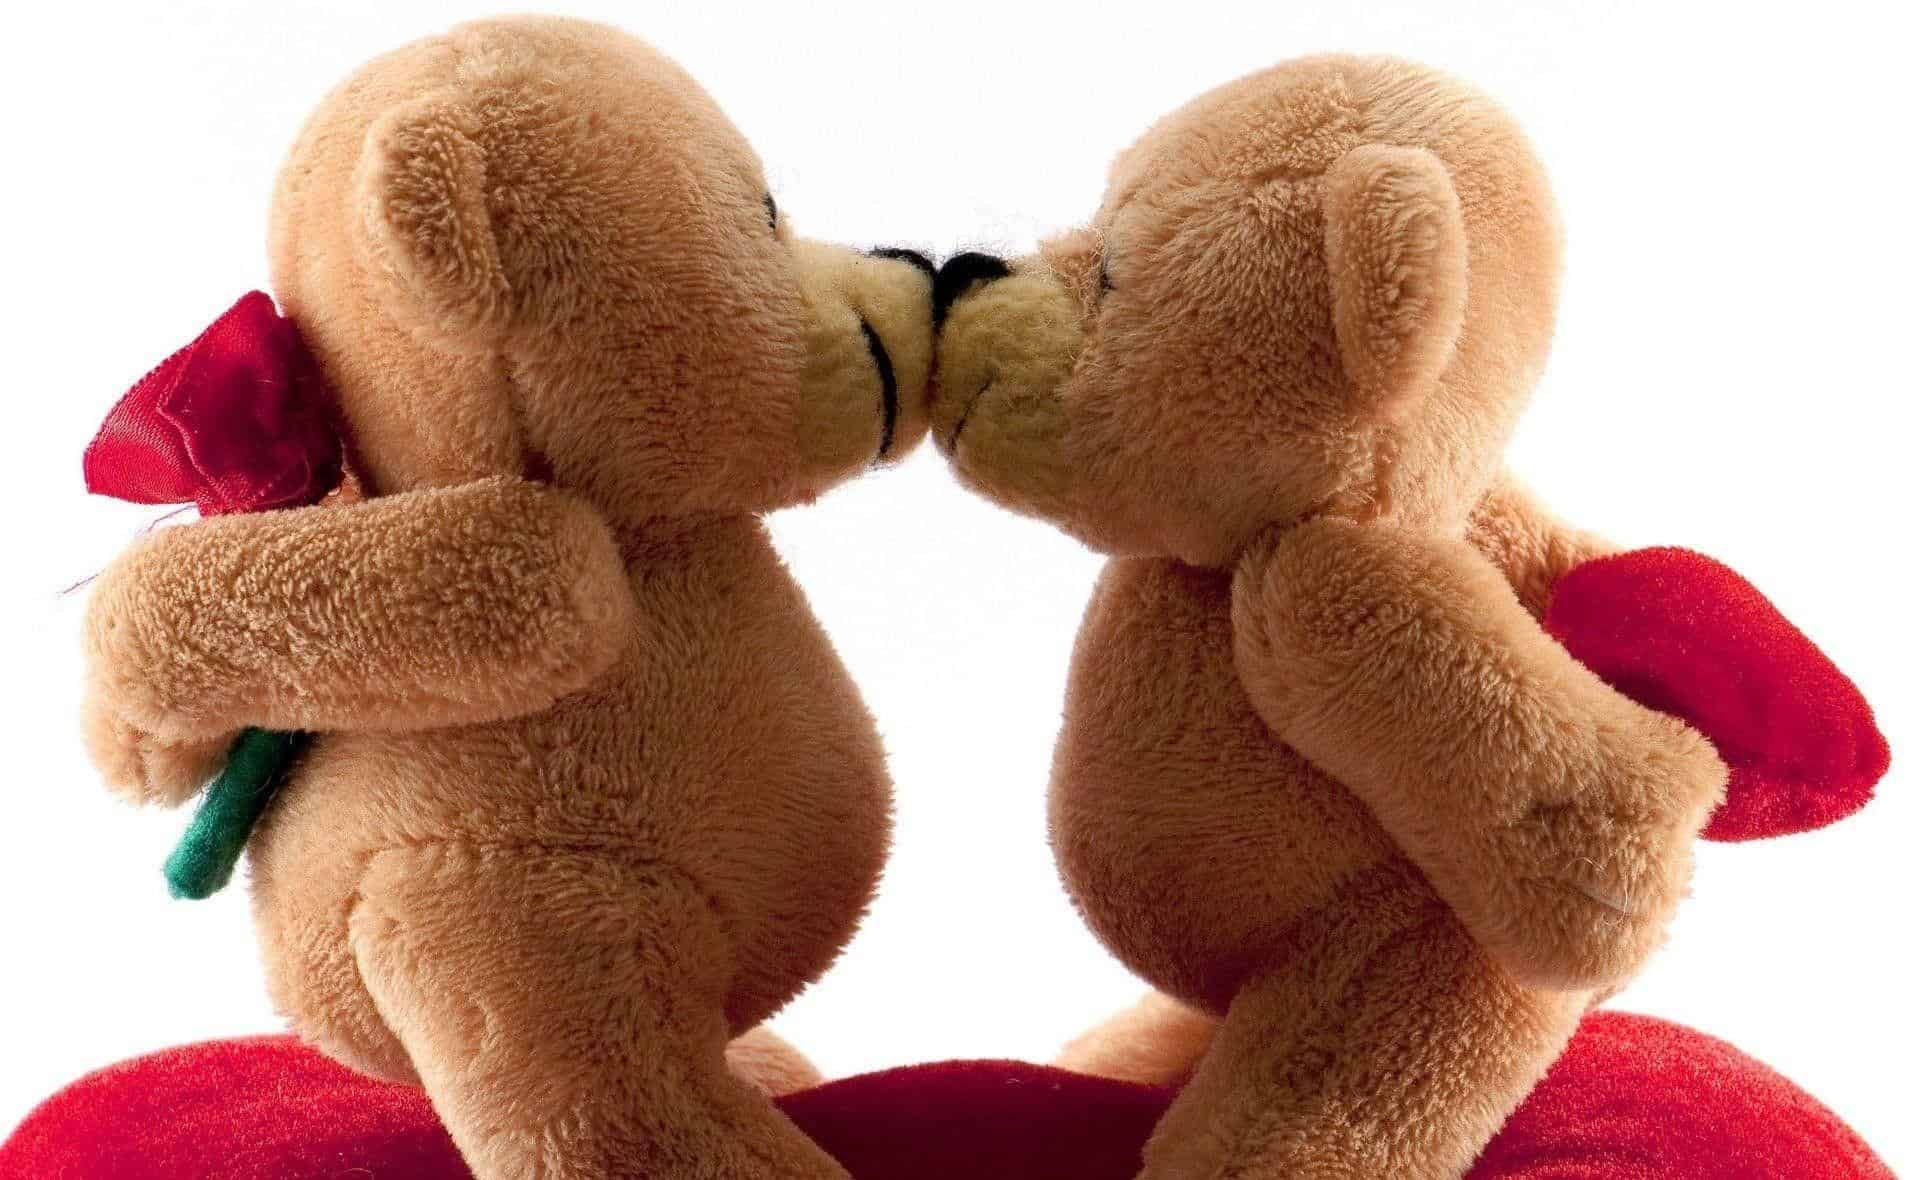 Teddy Day Images for Husband